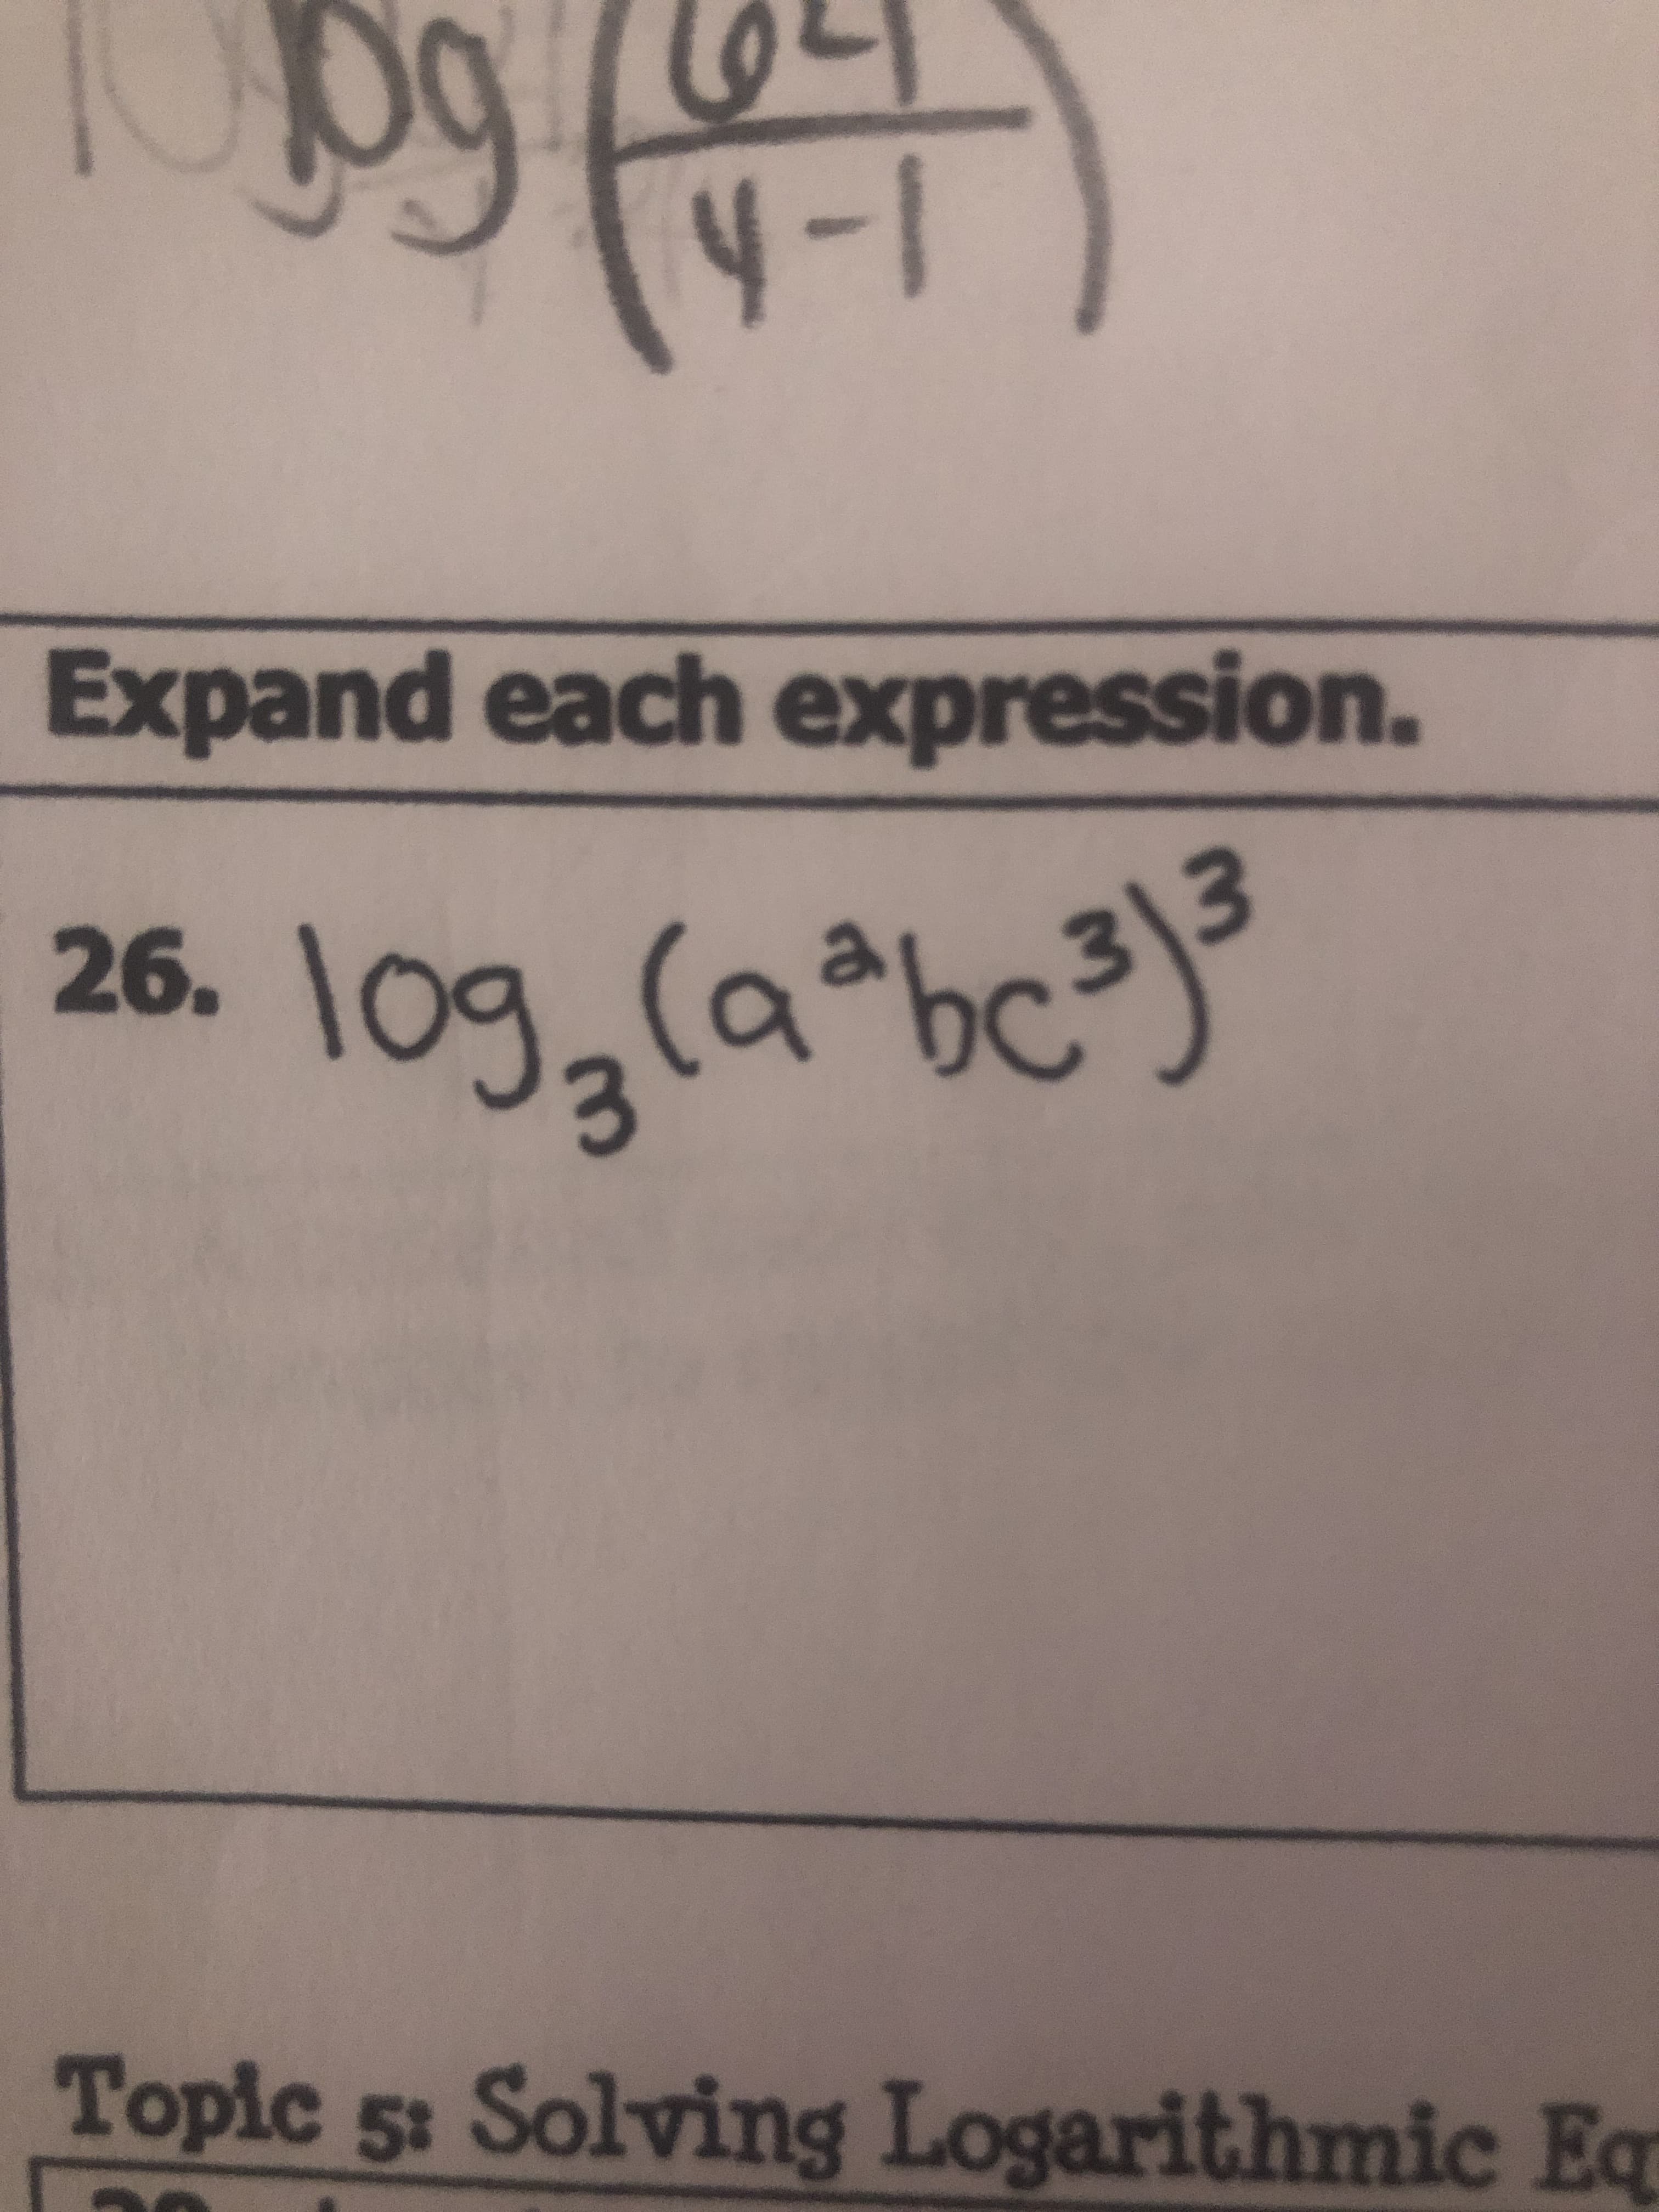 Expand each expression.
26. С
